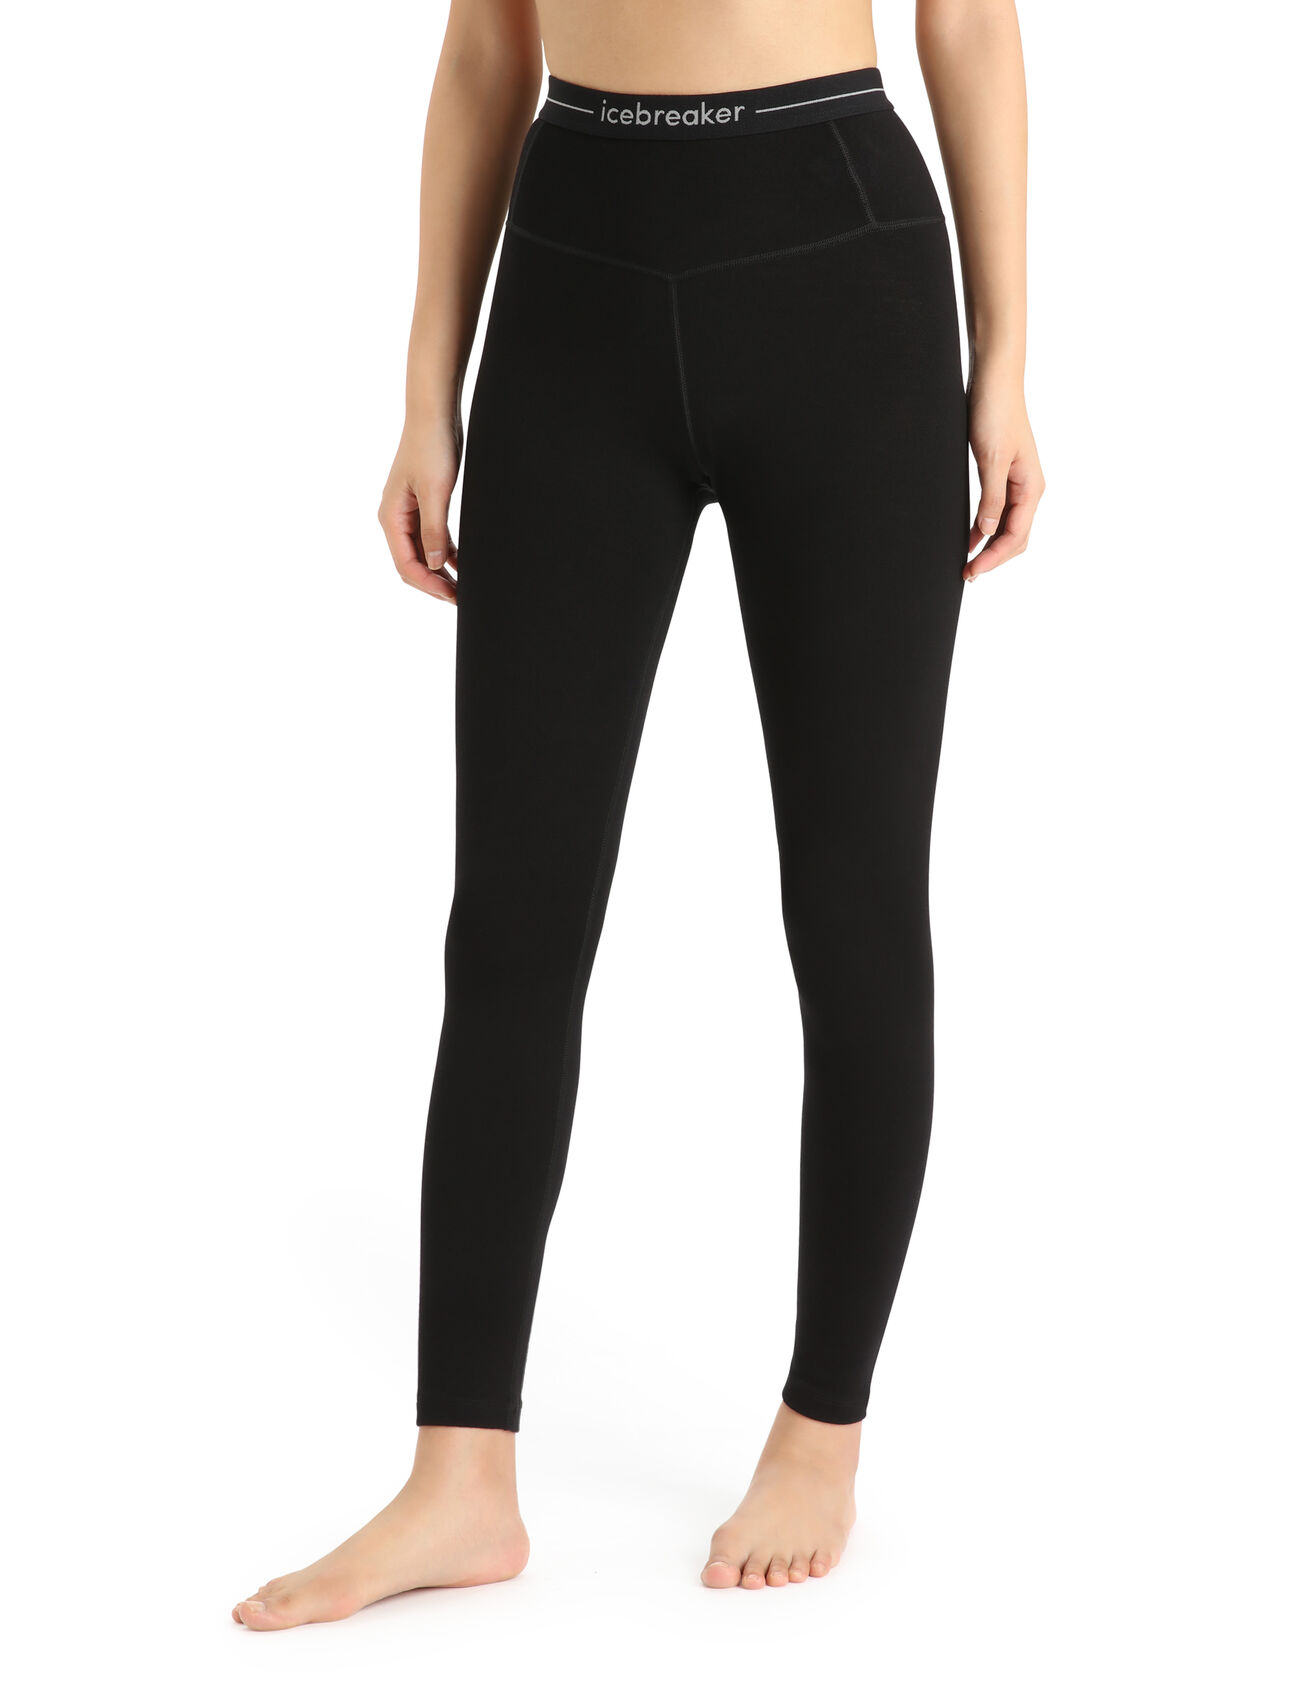 Womens Merino 260 Tech High Rise Thermal Leggings An incredibly warm merino base layer for the coldest months of the year, the 260 Tech High Rise Leggings are go-to piece for winter layering—ideal for skiing, snowshoeing and other cold-weather pursuits.